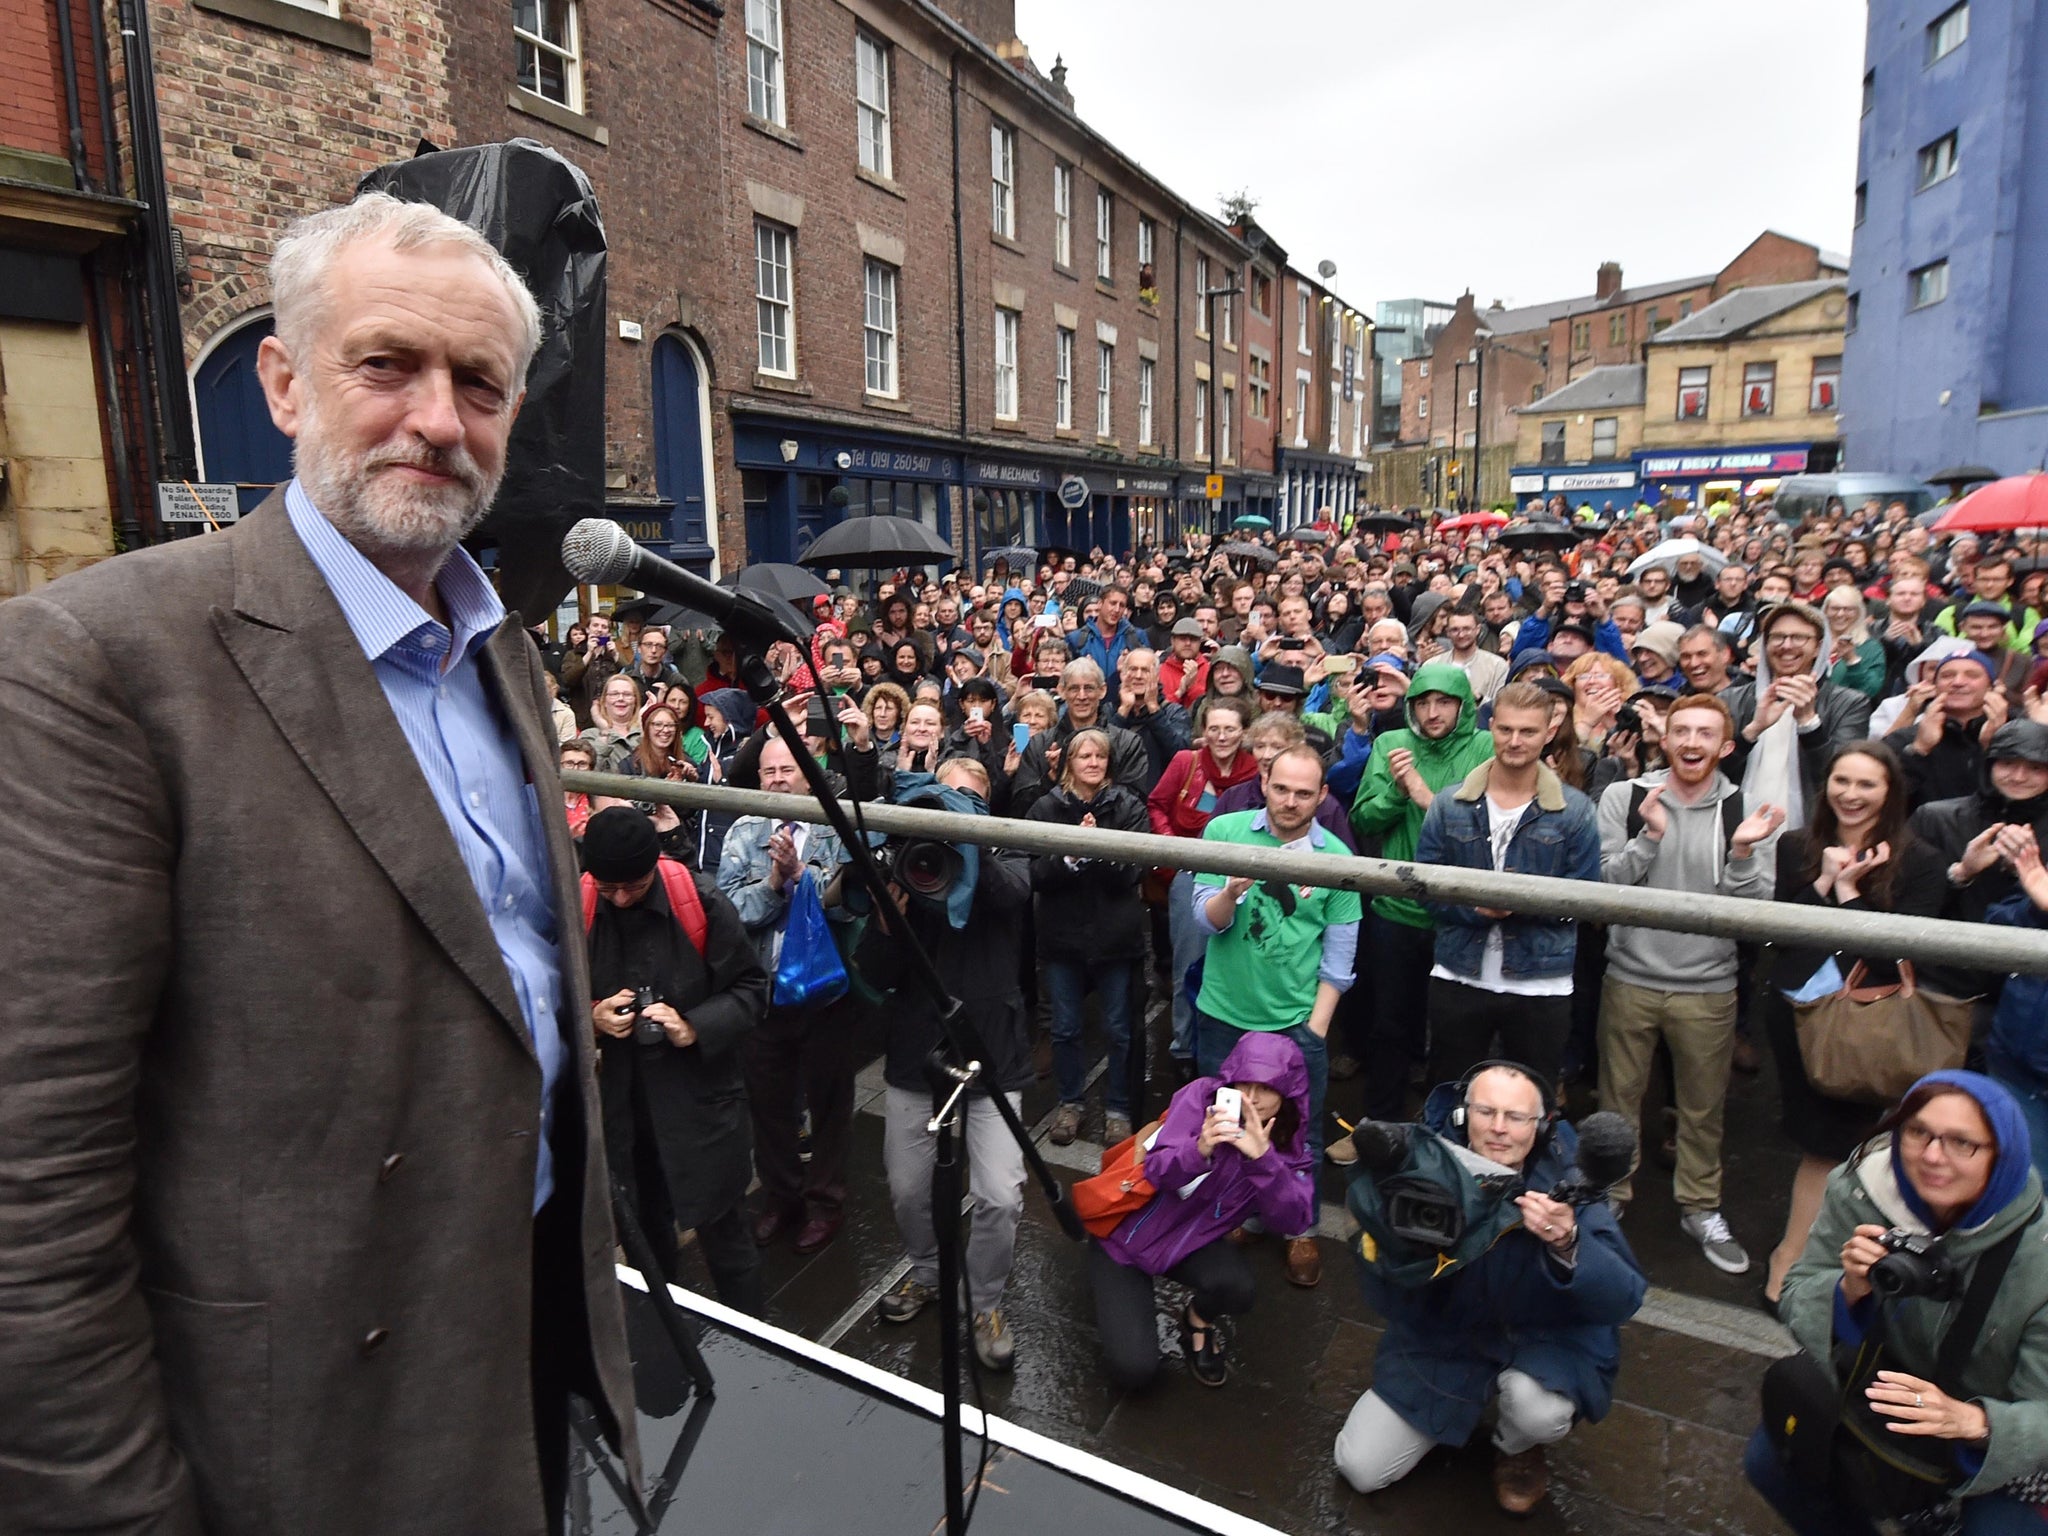 Jeremy Corbyn speaks outside the Tyne Theatre and Opera House, Newcastle, during his campaign.